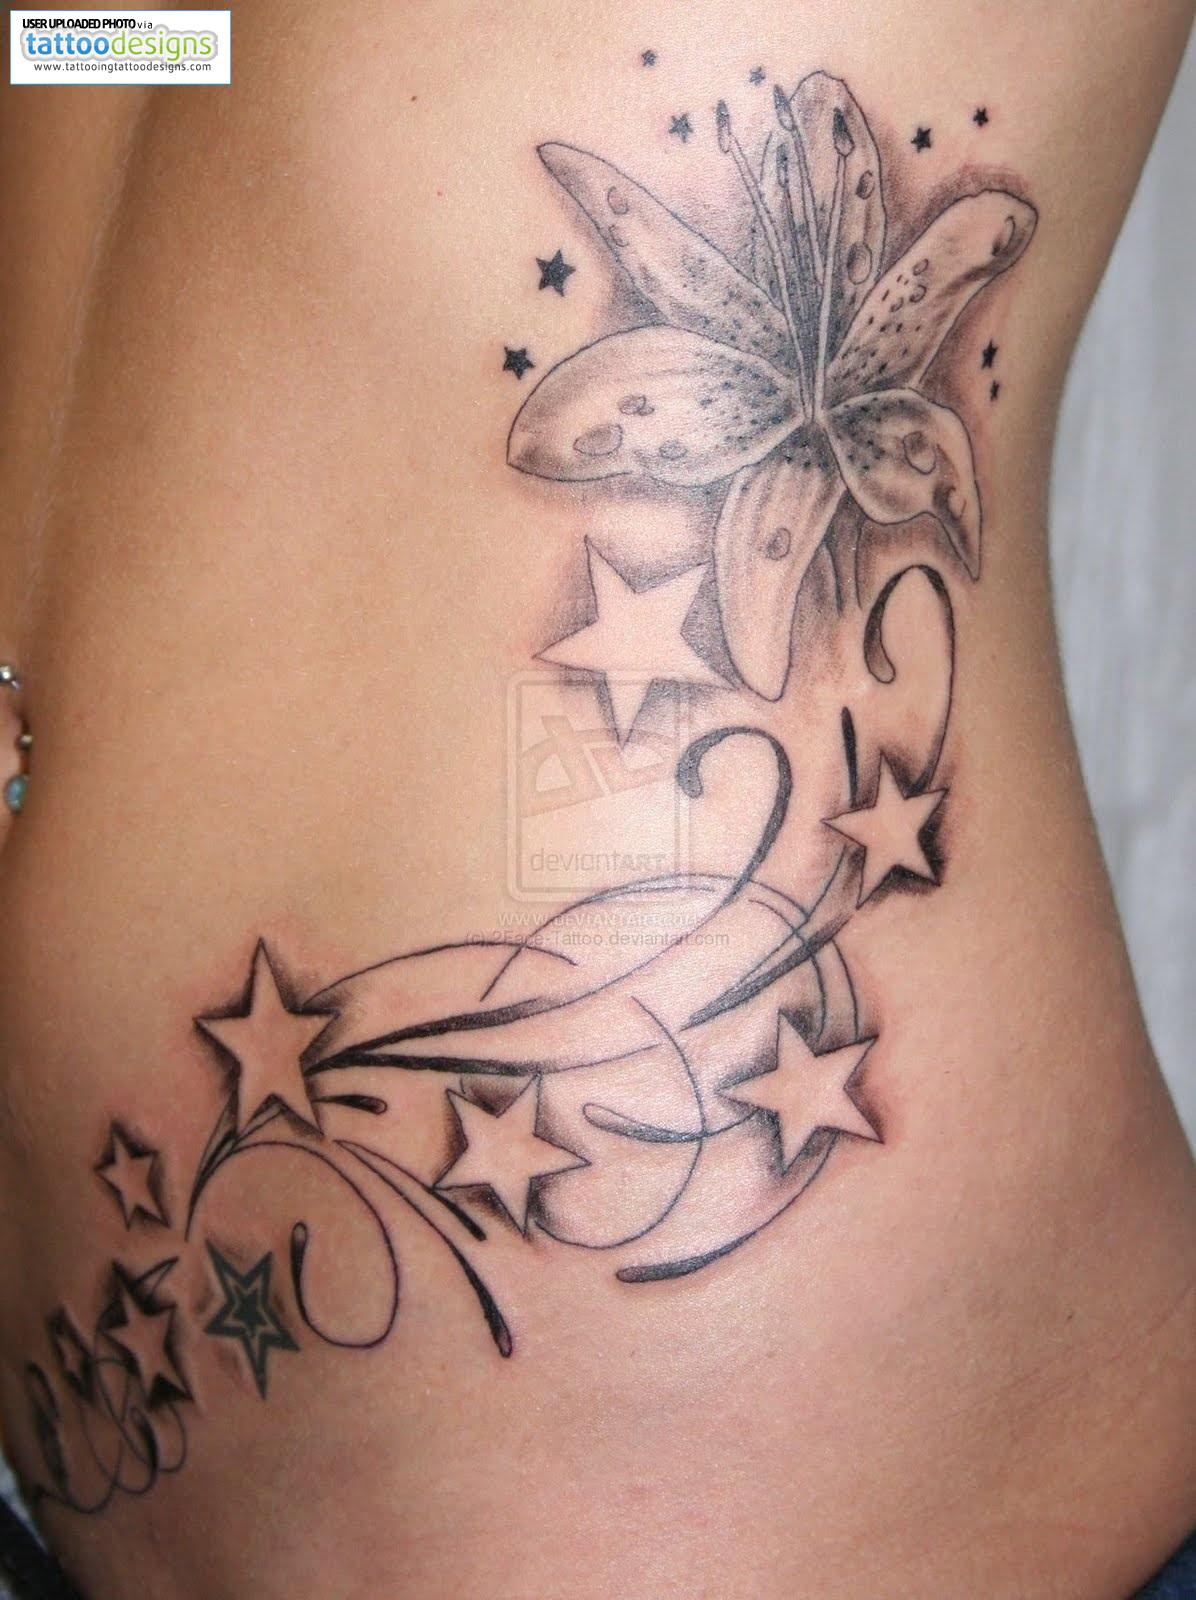 Flower Star And Butterfly Tattoo Designs Favorite Girl Tattoos Of in dimensions 1196 X 1600